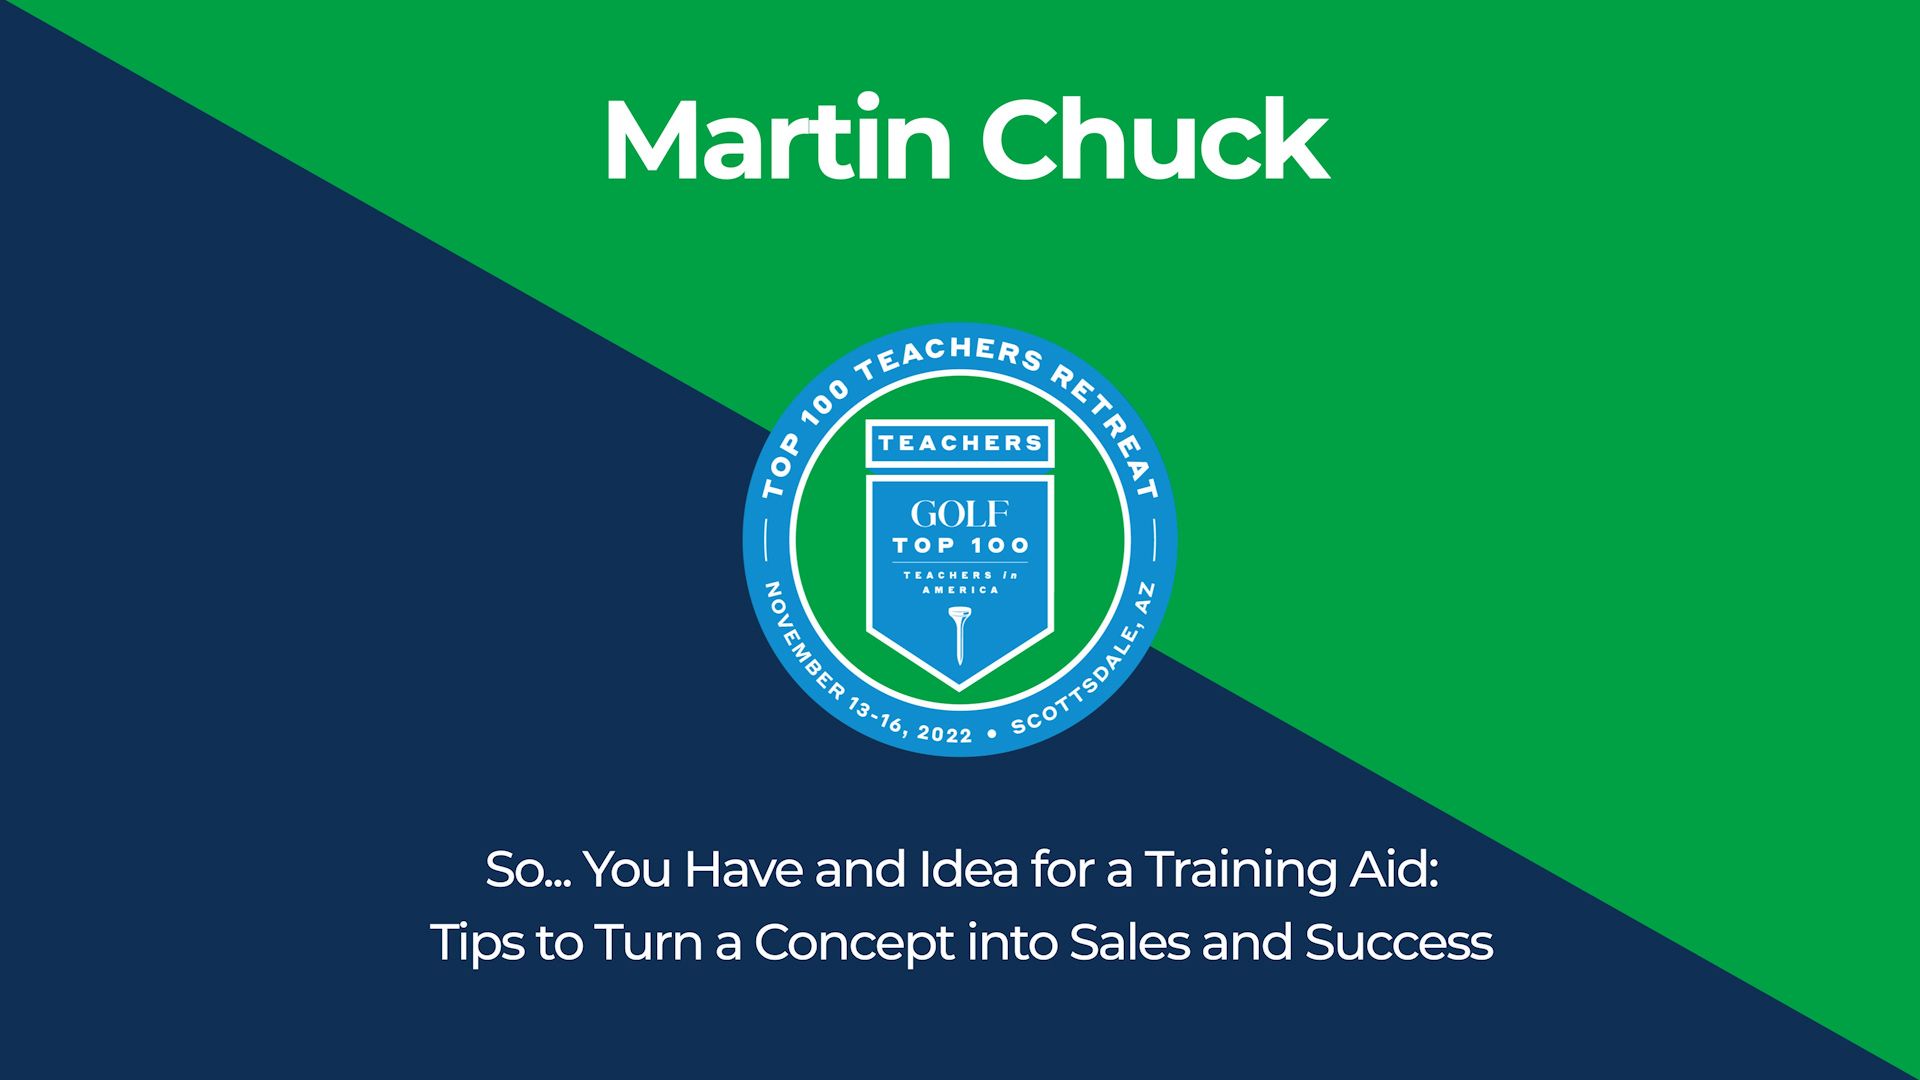 InsideGOLF Exclusive: Martin Chuck shares tips to turn a training aid concept into sales and success